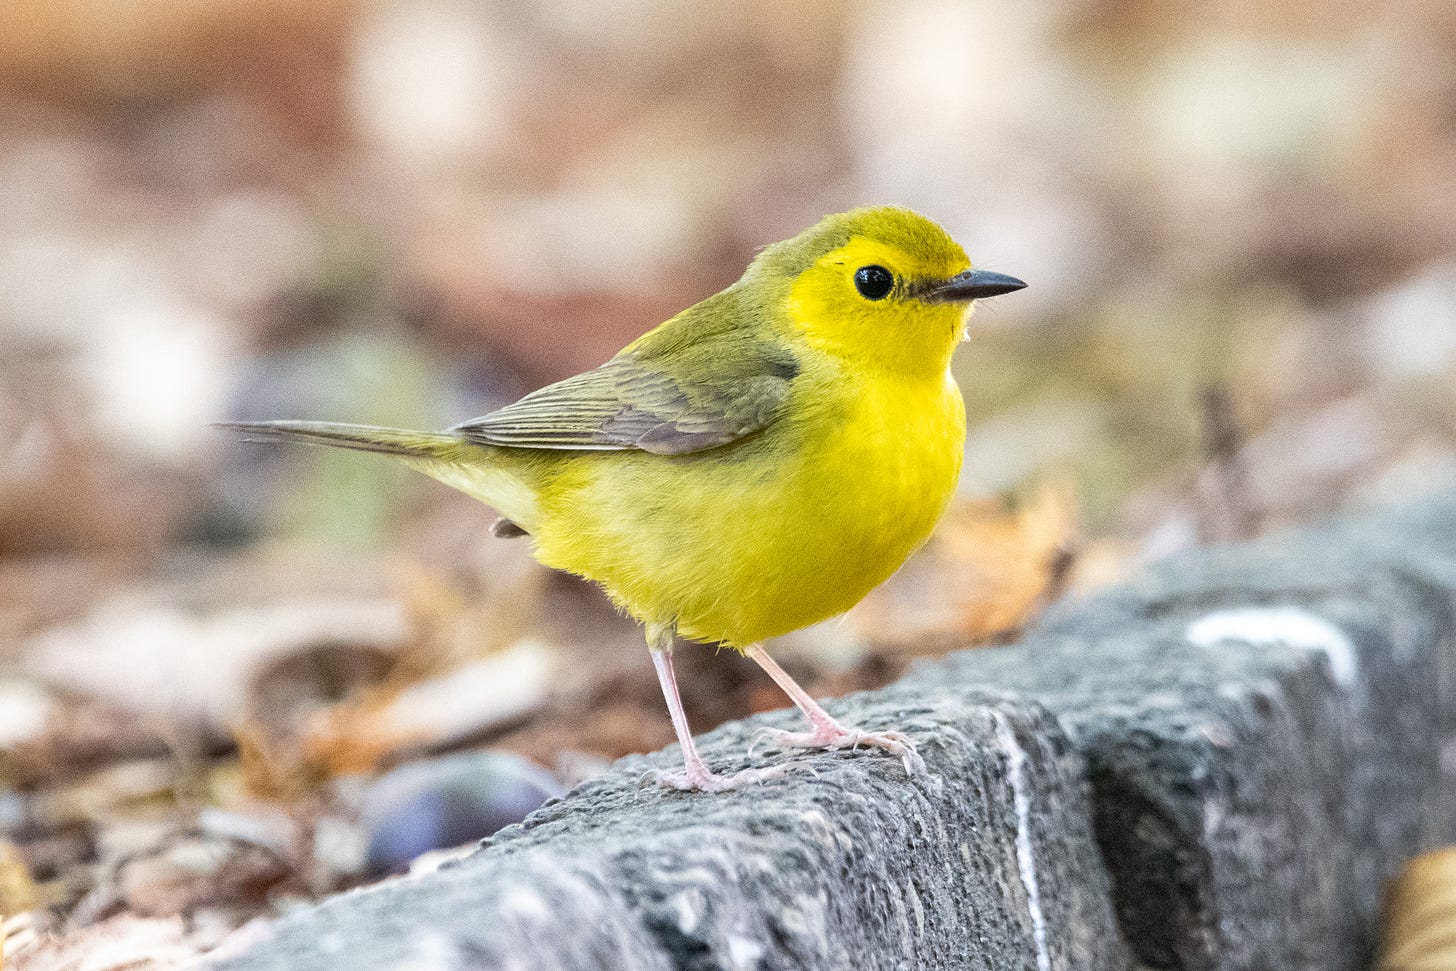 A hooded warbler (female), in profile, standing on a gray stone brick